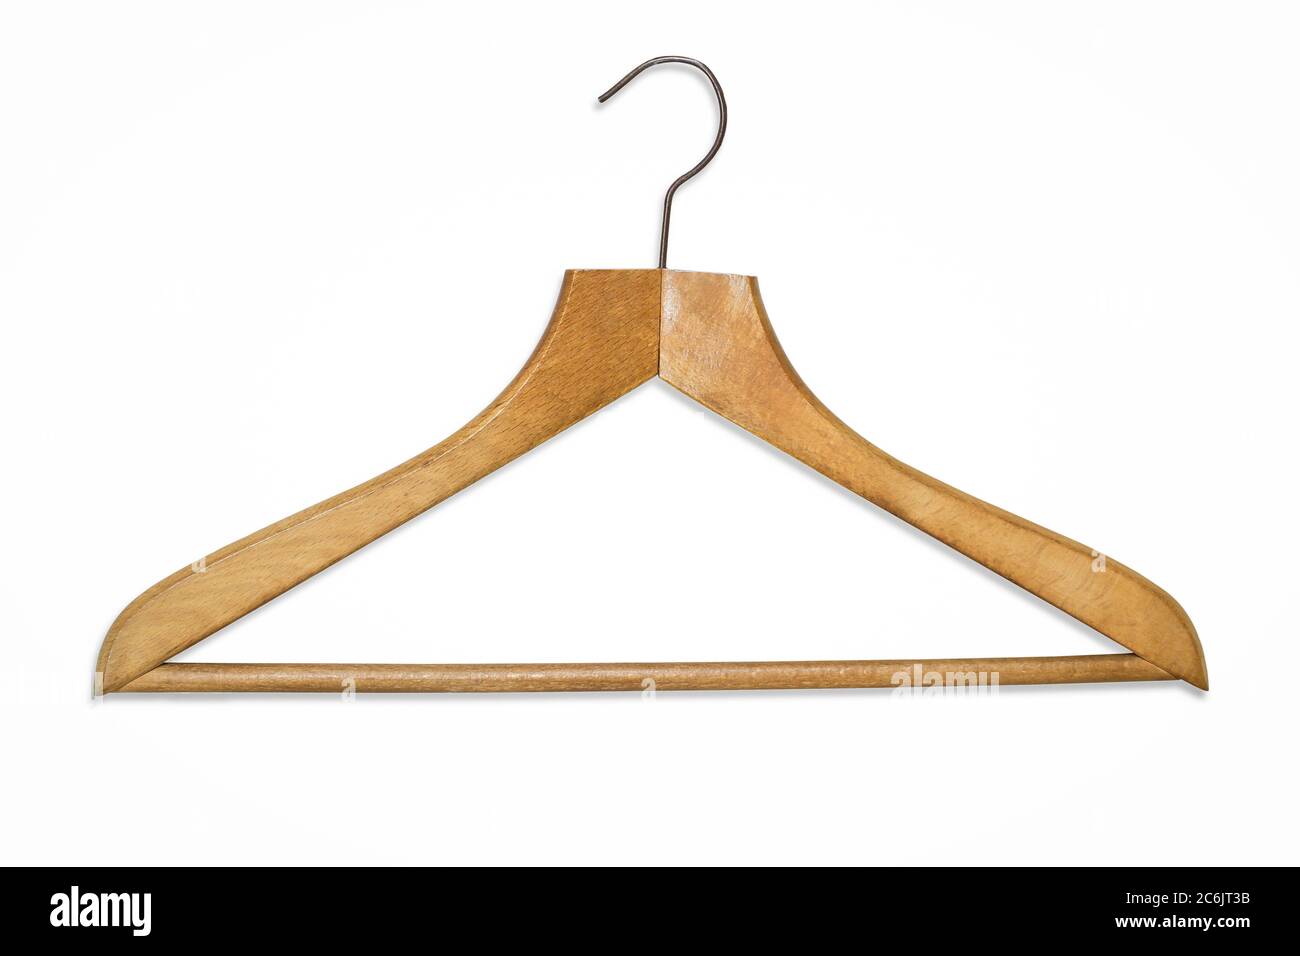 Wooden clothes hanger with metallic hook isolated on white background Stock Photo